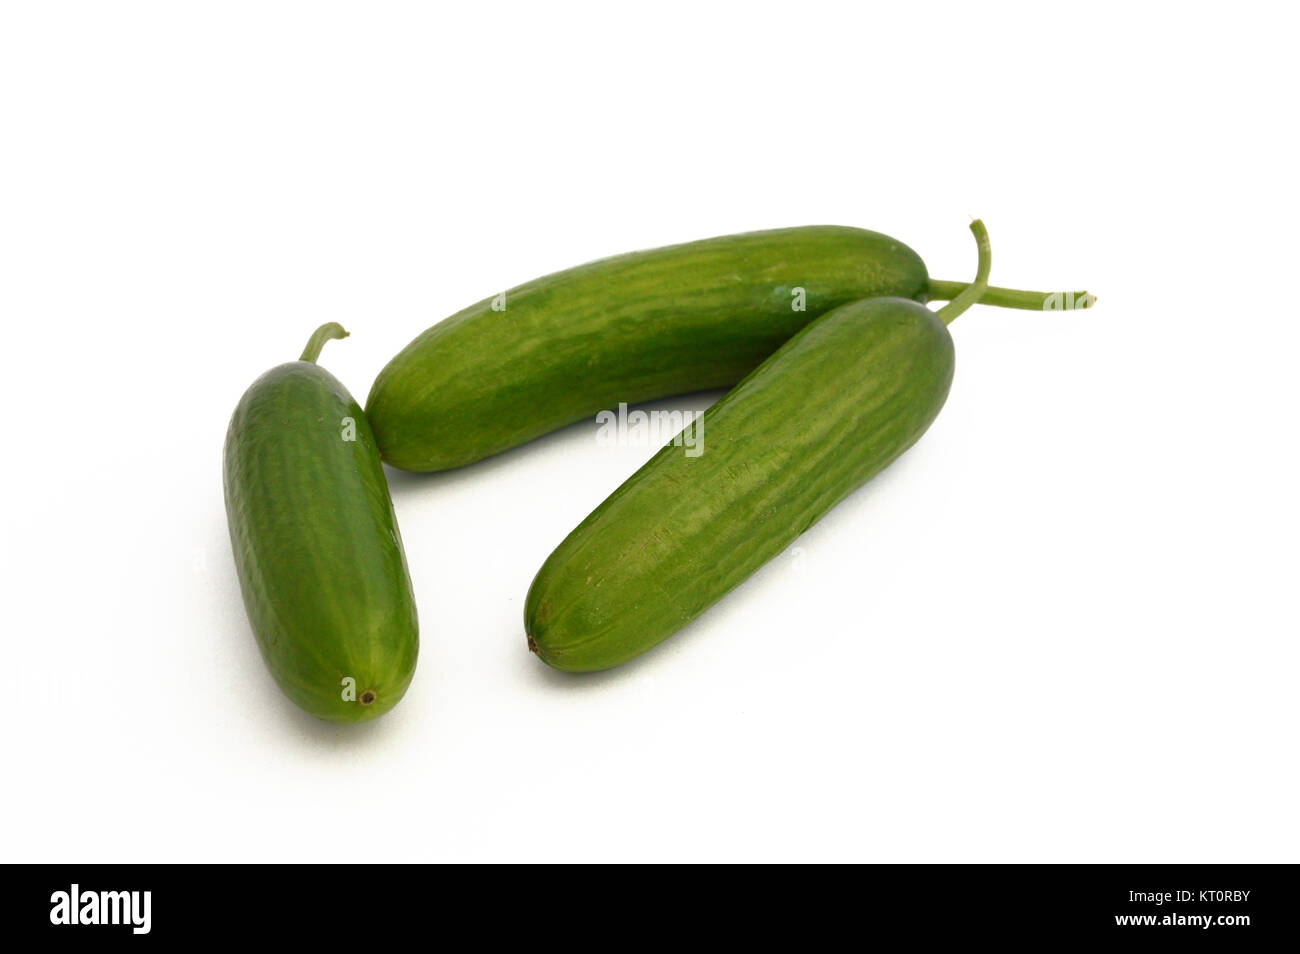 Cucumber pictures Stock Photo